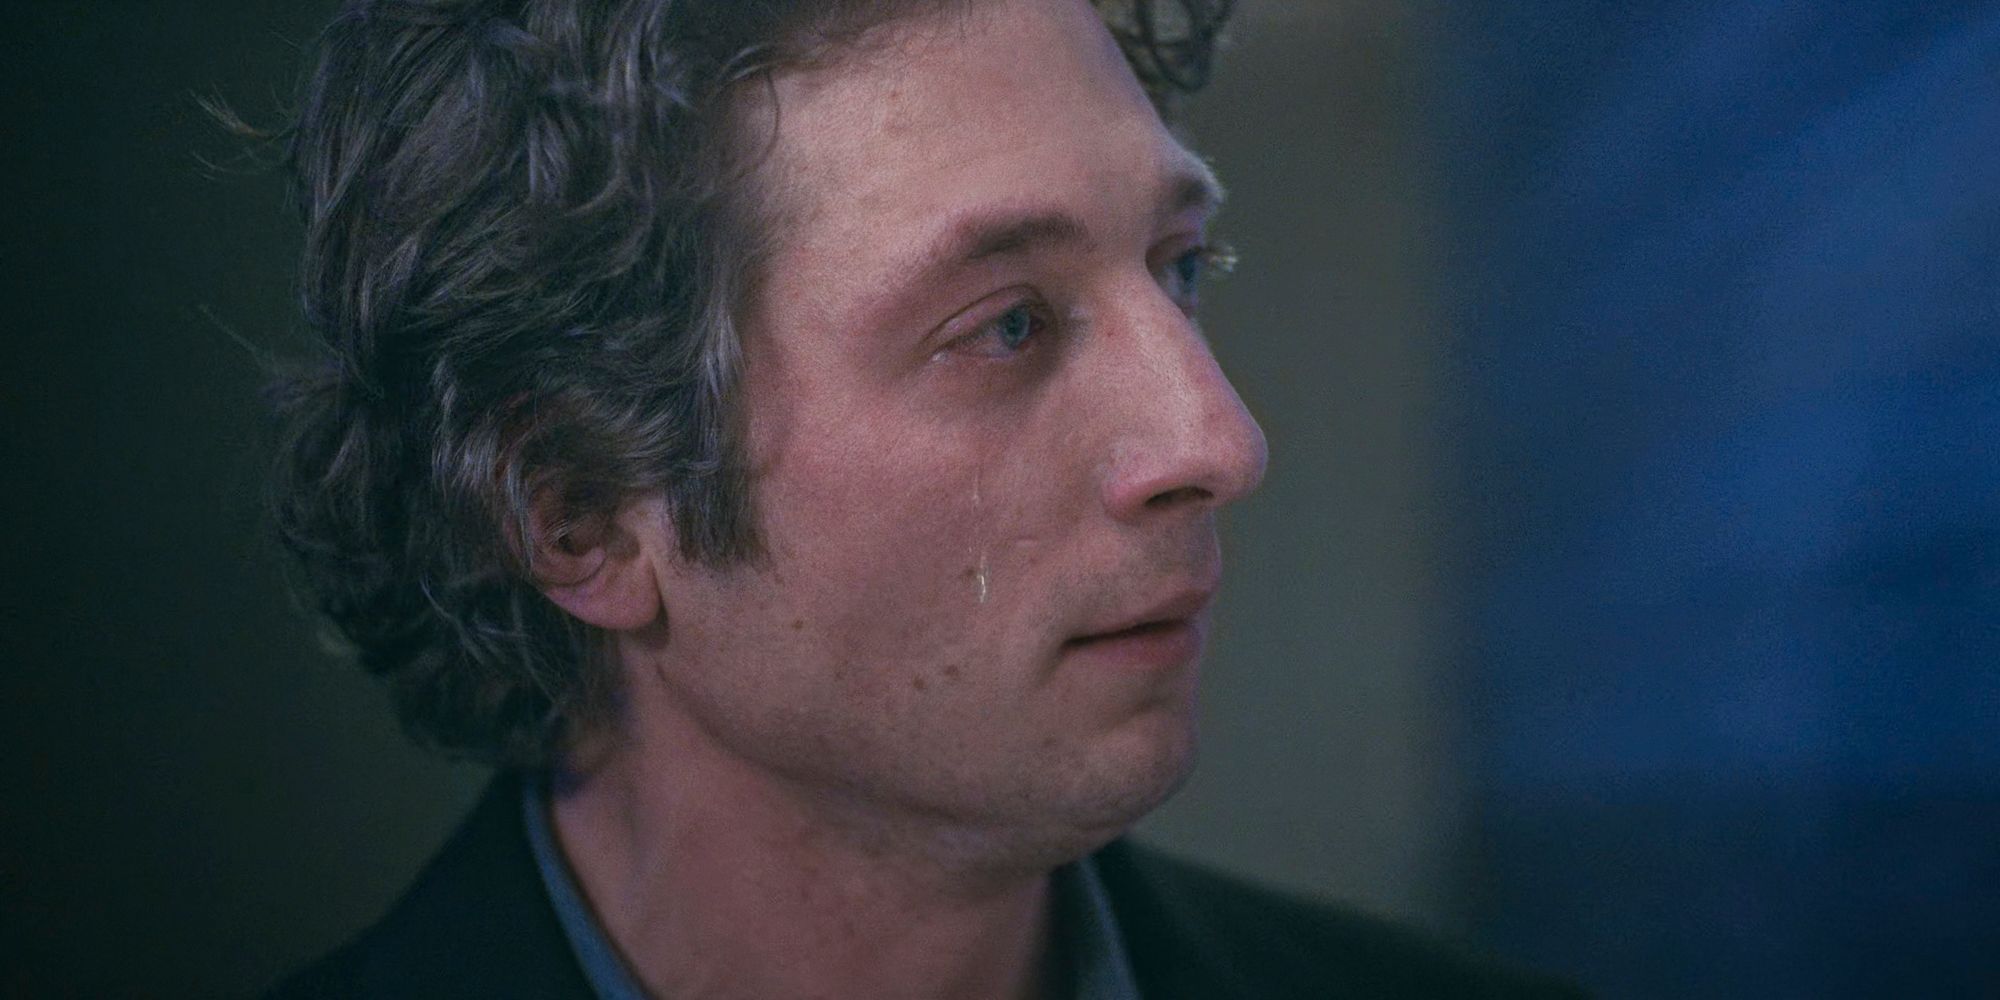 Carmy (Jeremy Allen White) crying tears of joy over the recognition from Chef David in The Bear Season 3 Episode 10